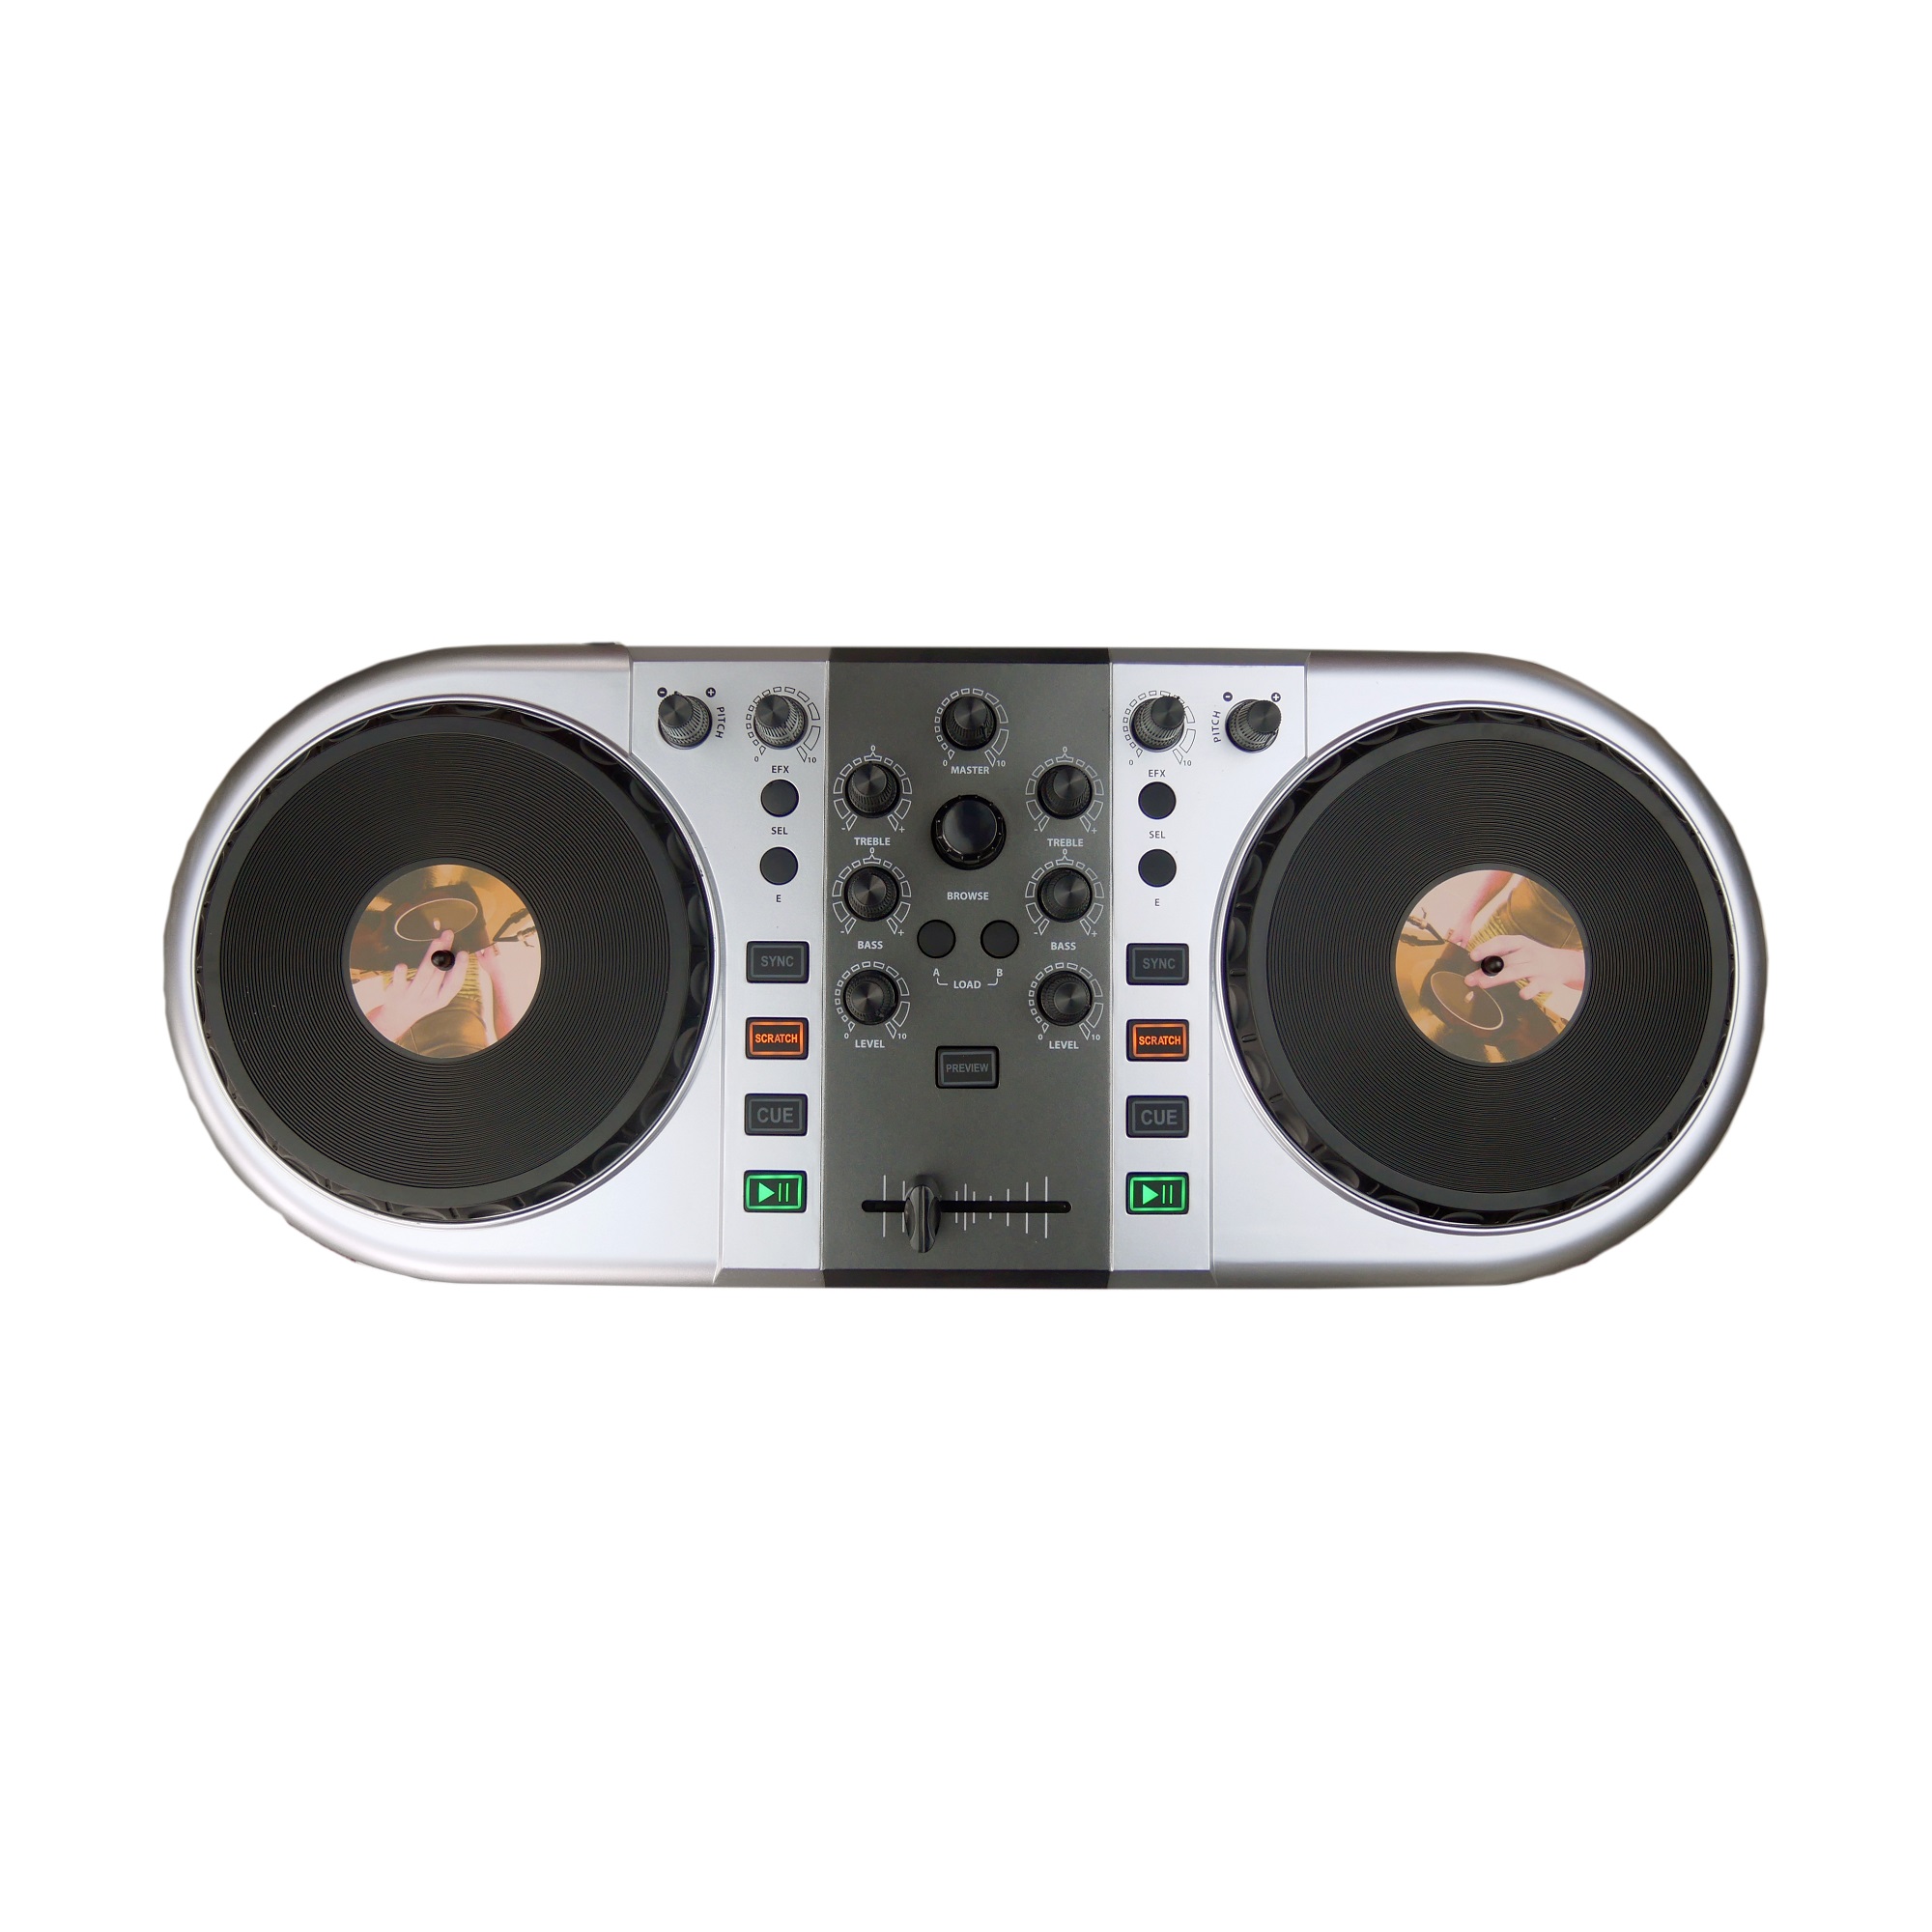 MIDI-1 Midi Controller for DJ parties, events and clubs